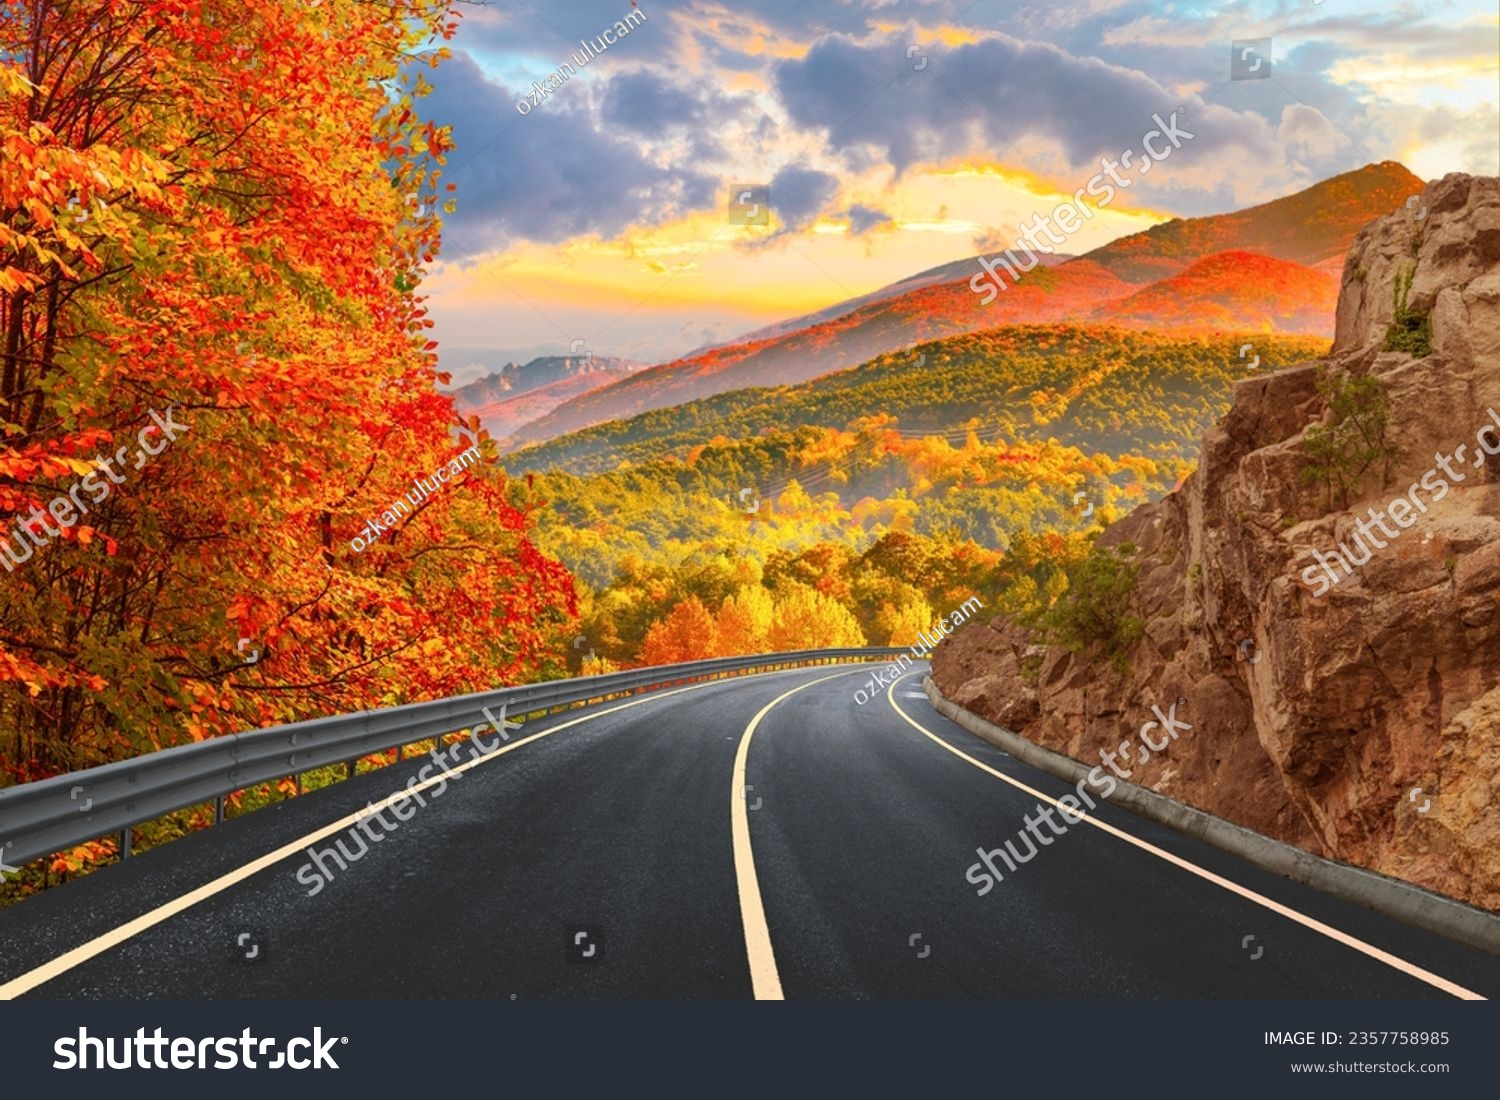 Black asphalt road landscape at sunset in beautiful colorful nature. Highway scenery among mountains in autumn season. Nature landscape on beautiful road in colorful fall. Autumn landscape in Germany. #2357758985